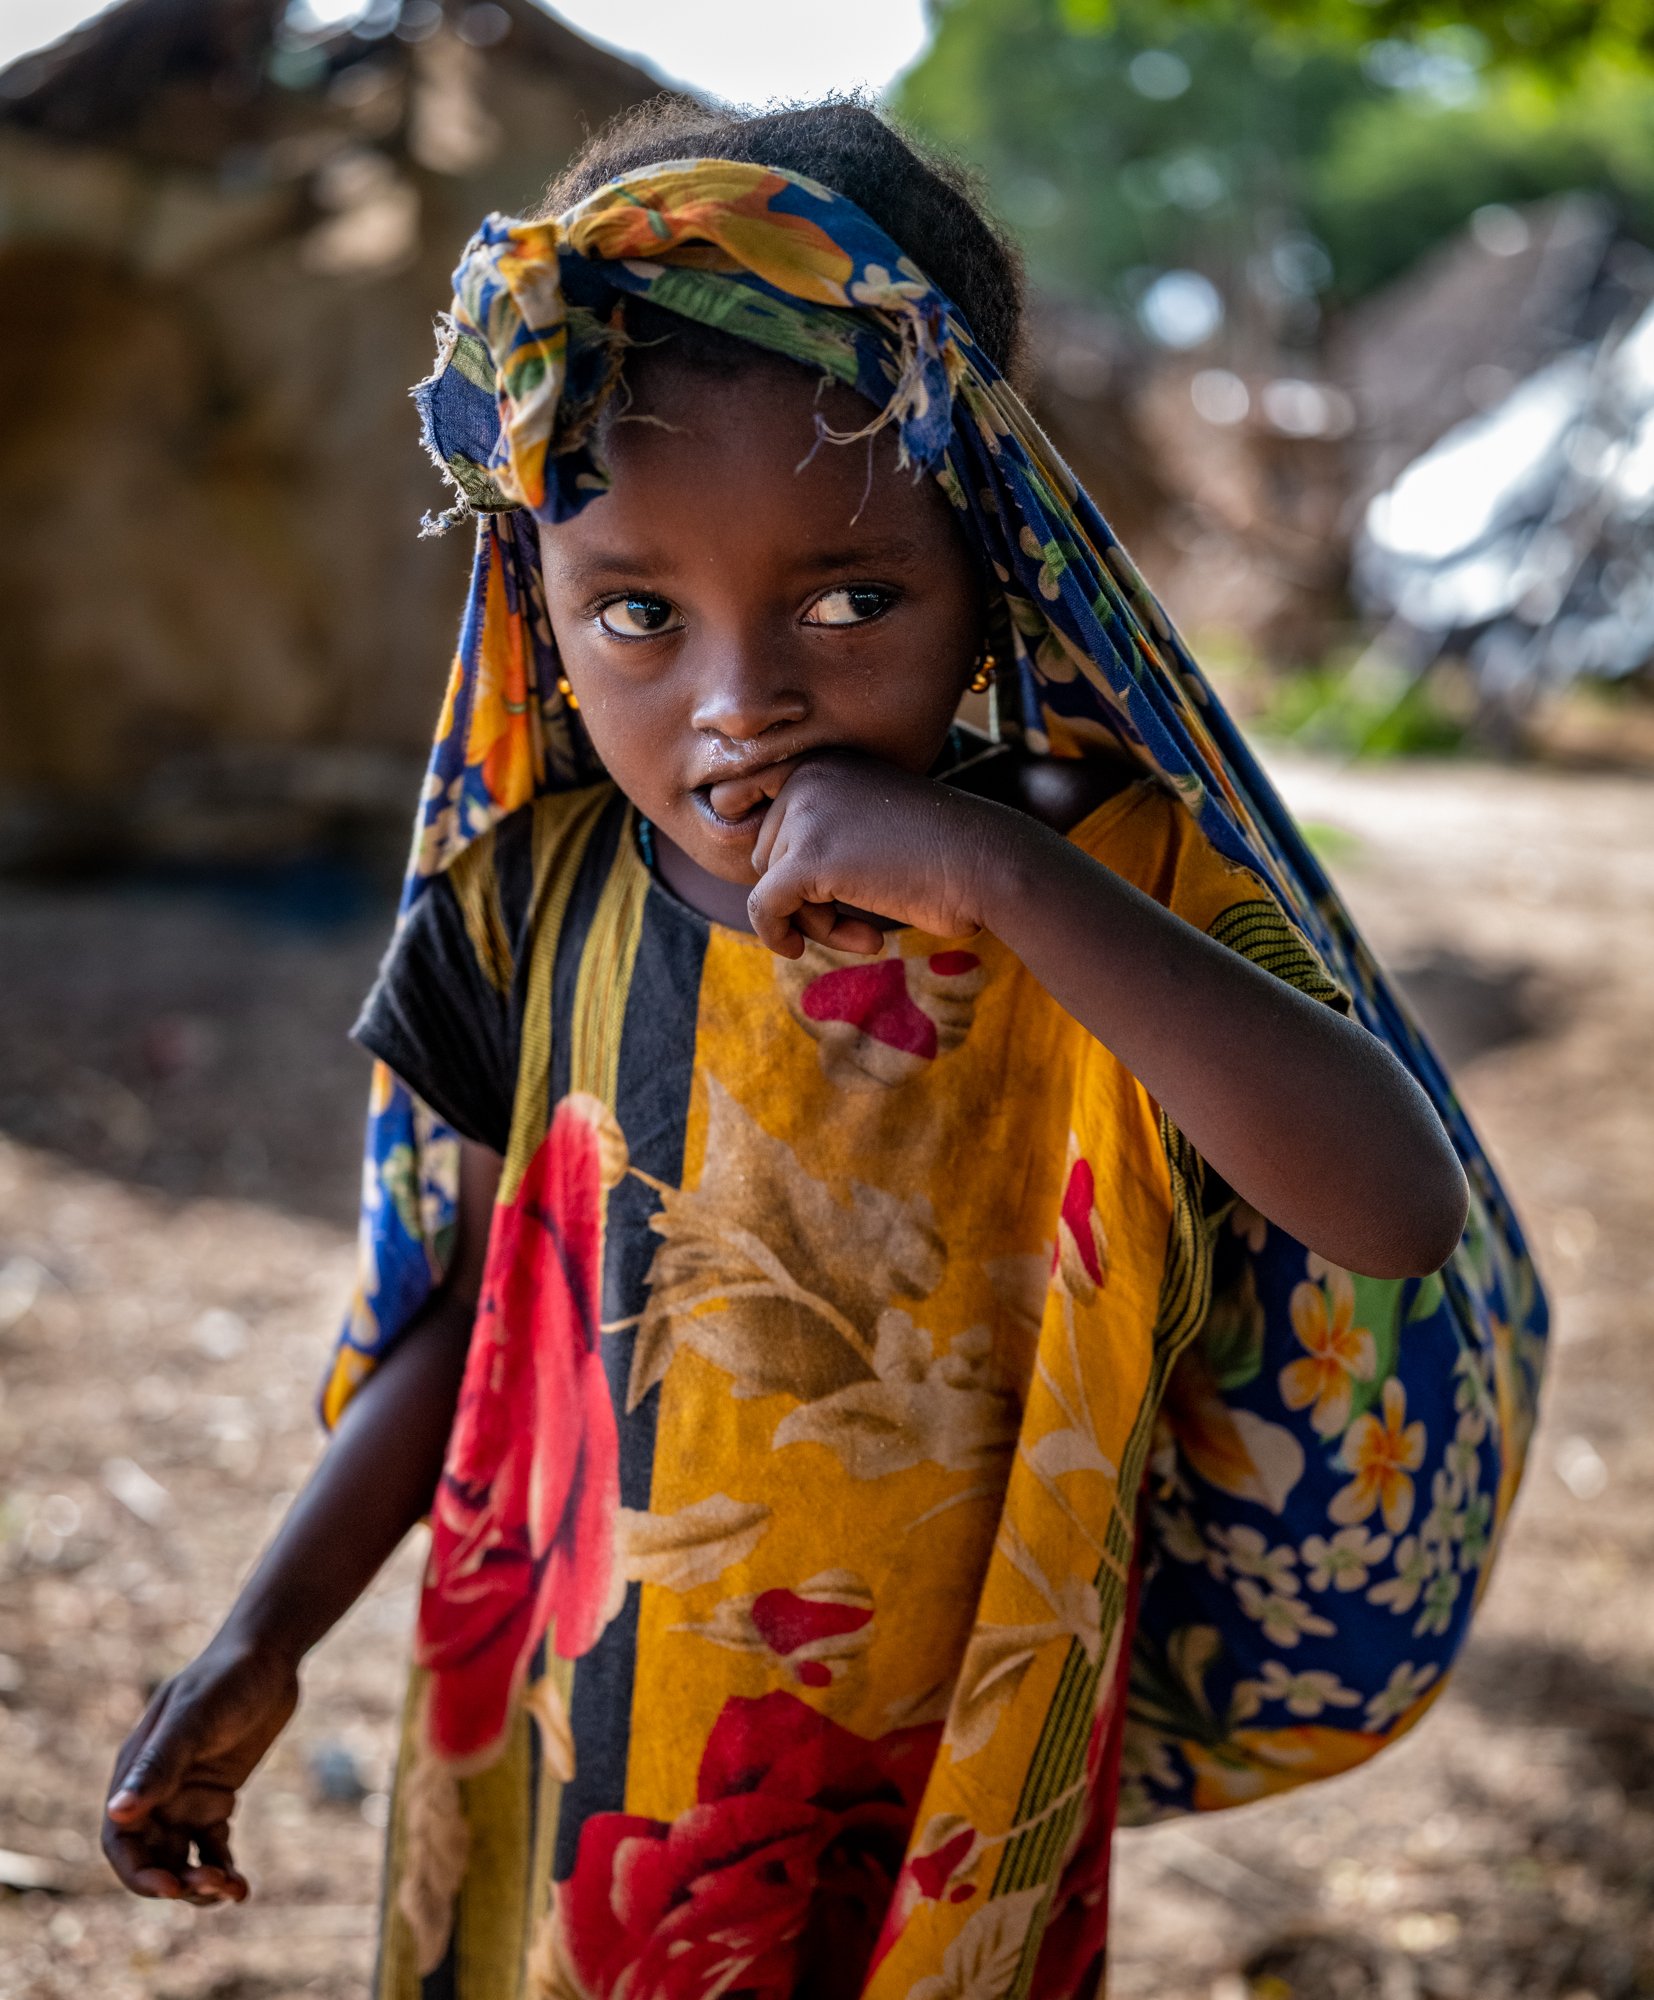 Fatima Ali, age 4, carrying a bundle of Ukwaju fruit she has collected to make into juice in the village of Kiangwe, Kenya